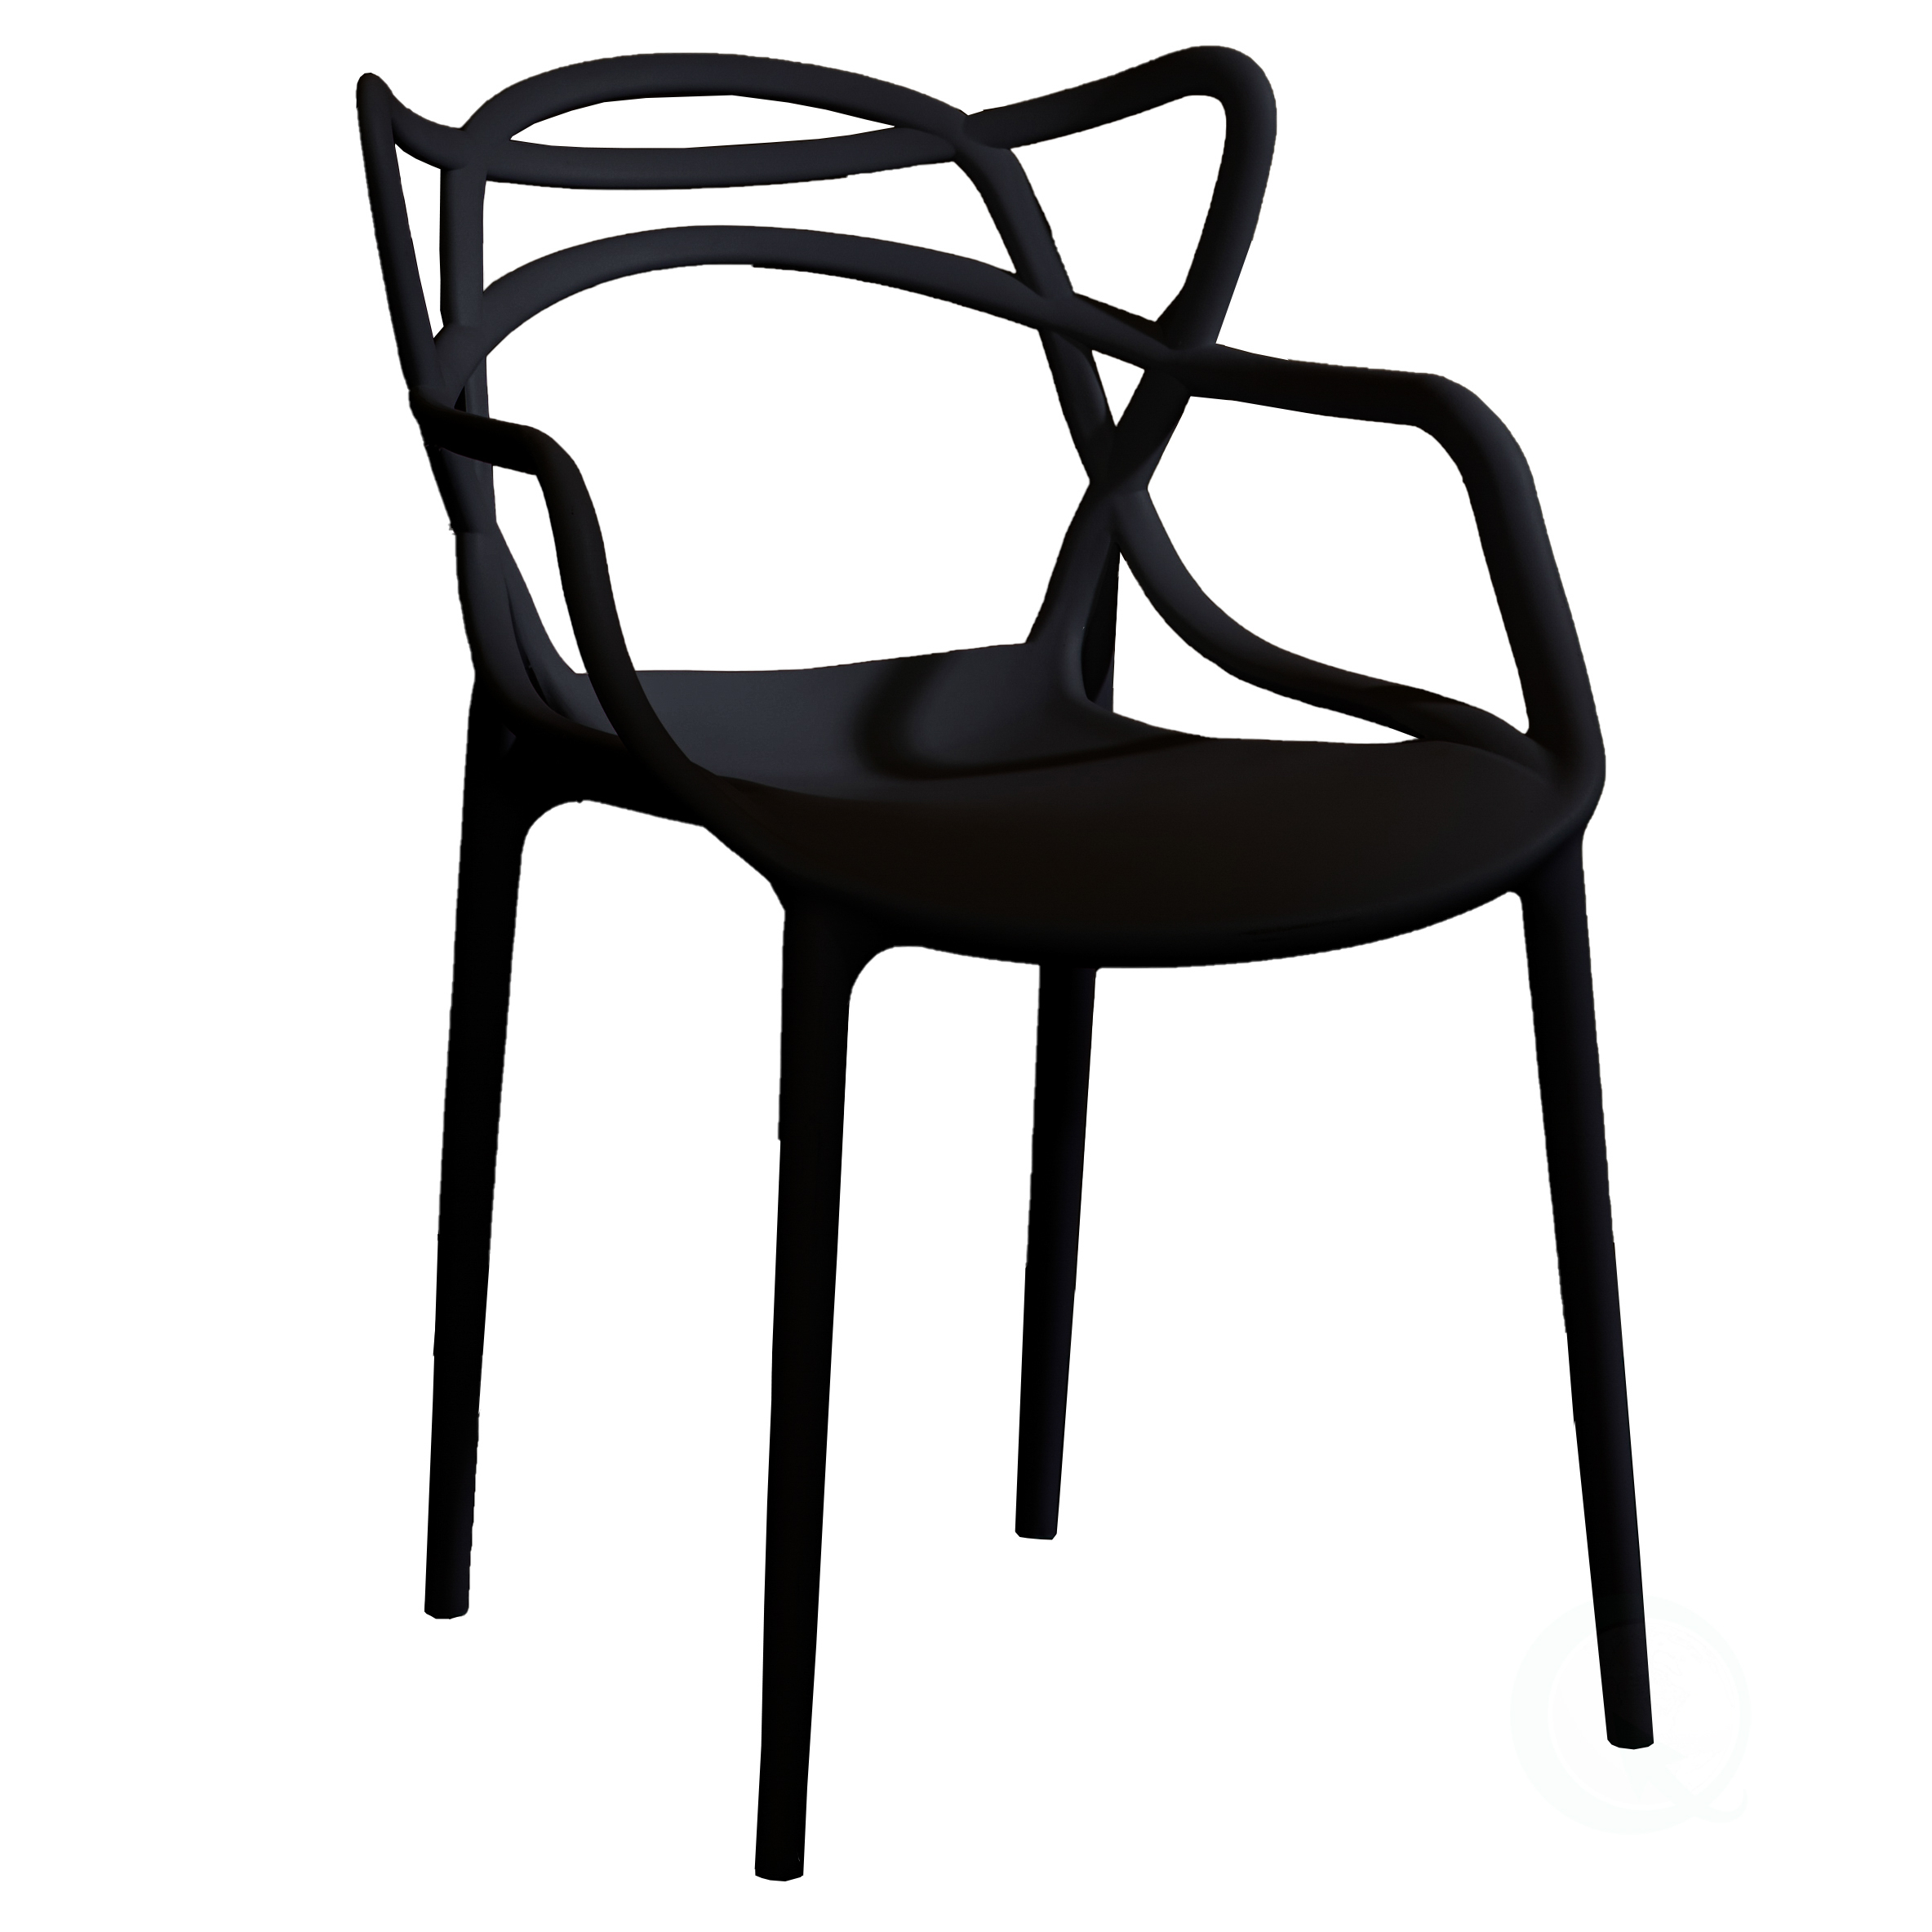 Mid-Century Modern Style Stackable Plastic Molded Arm Chair With Entangled Open Back - Black Single